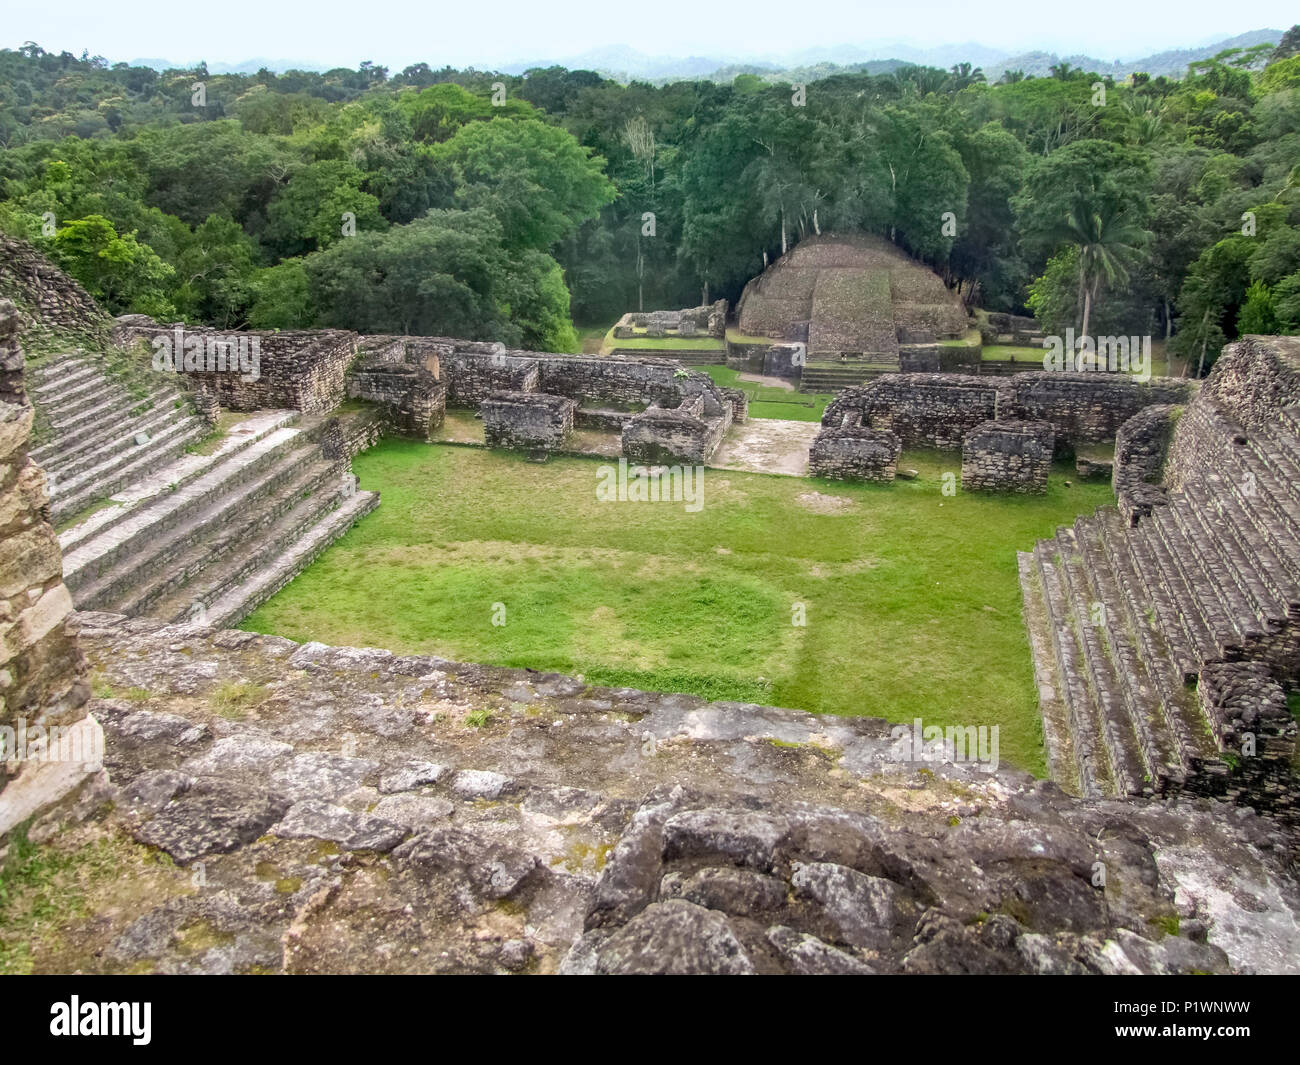 high angle shot showing the ancient Maya archaeological site named Caracol located in Belize in Central America Stock Photo